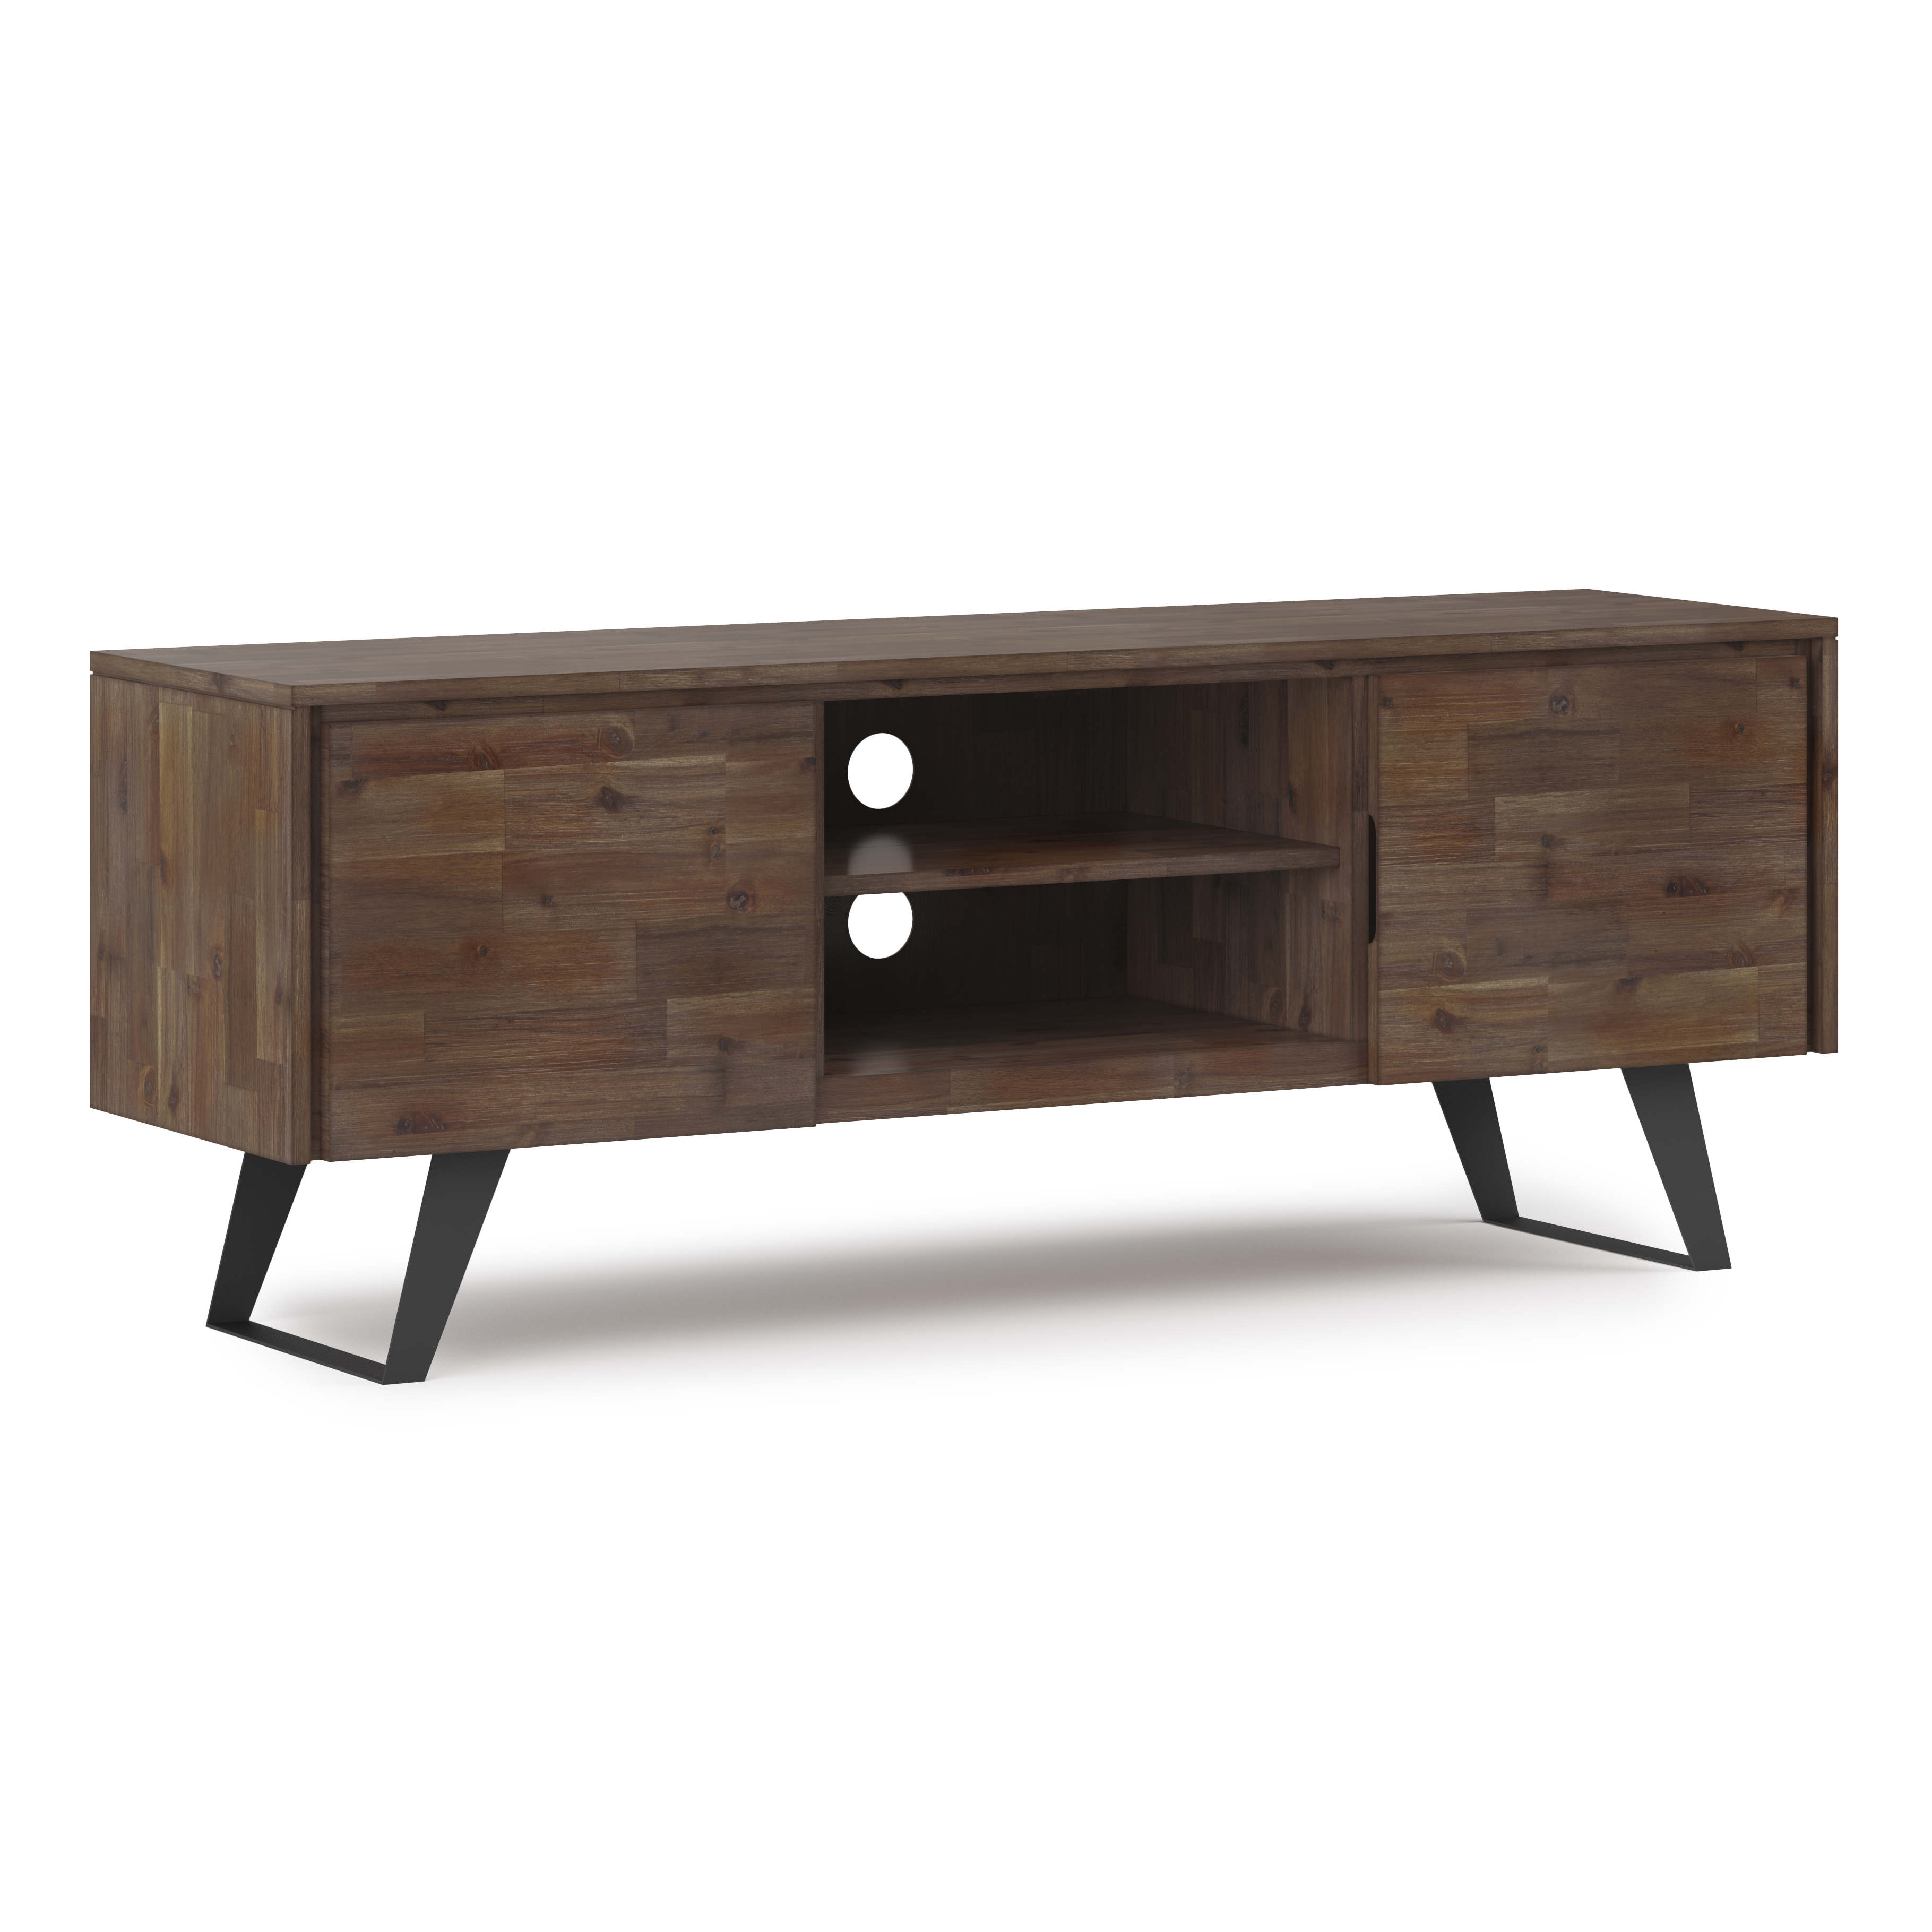 Simpli Home Lowry 63" Solid Wood Modern TV Stand in Rustic Aged Brown - image 1 of 13